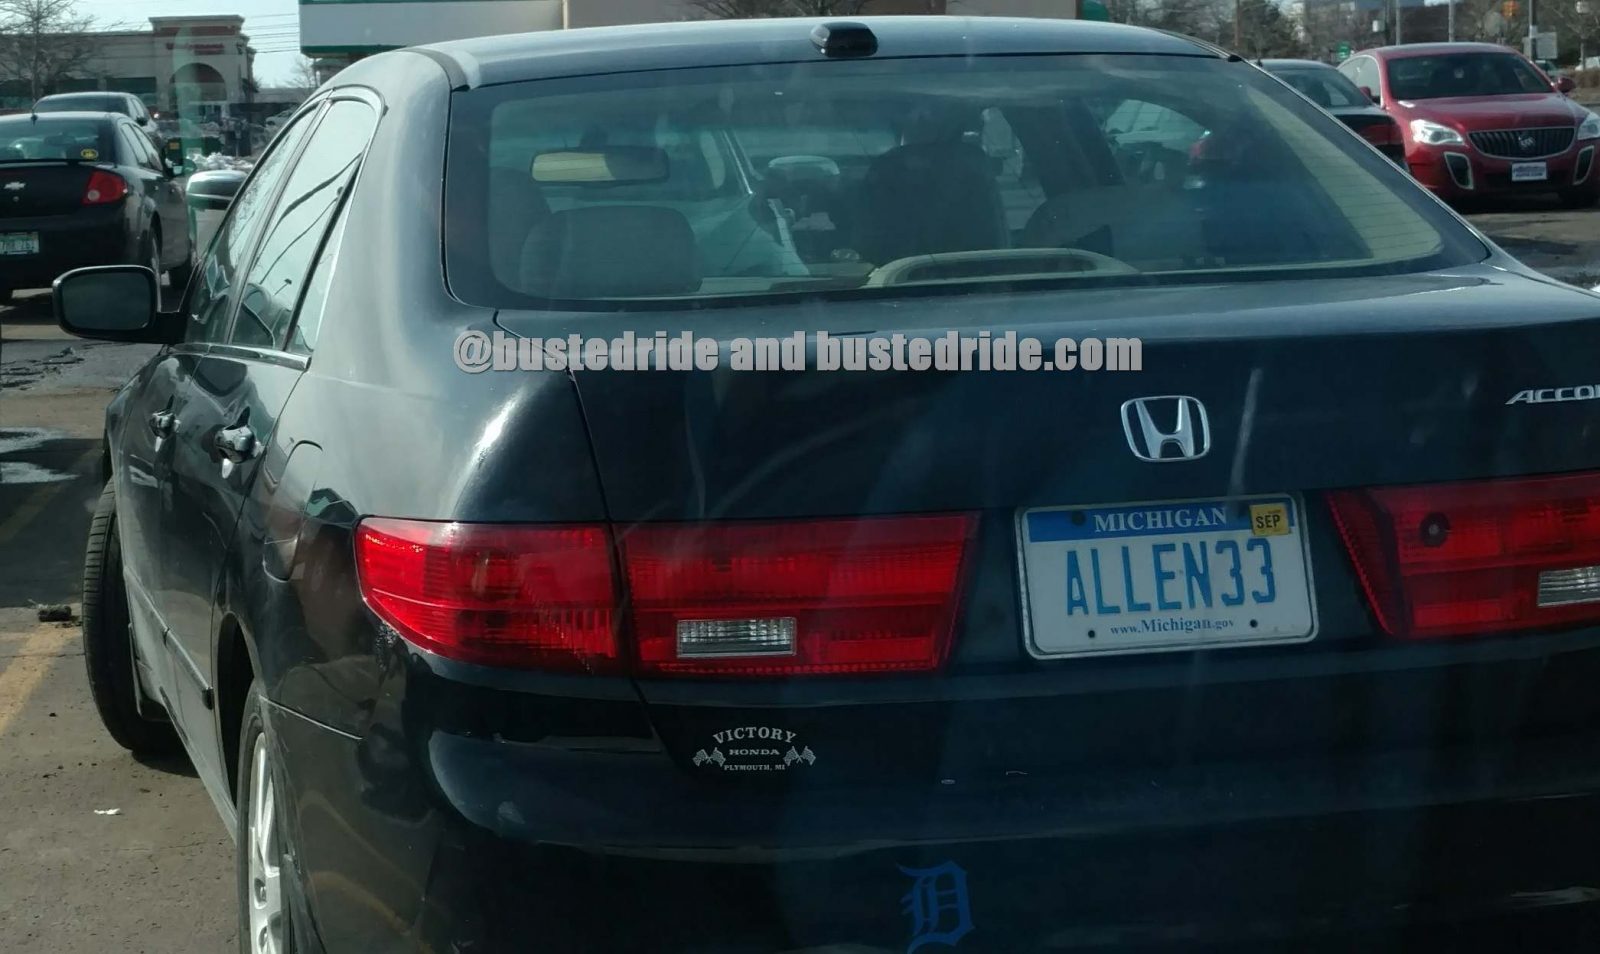 ALLEN33 - Vanity License Plate by Busted Ride